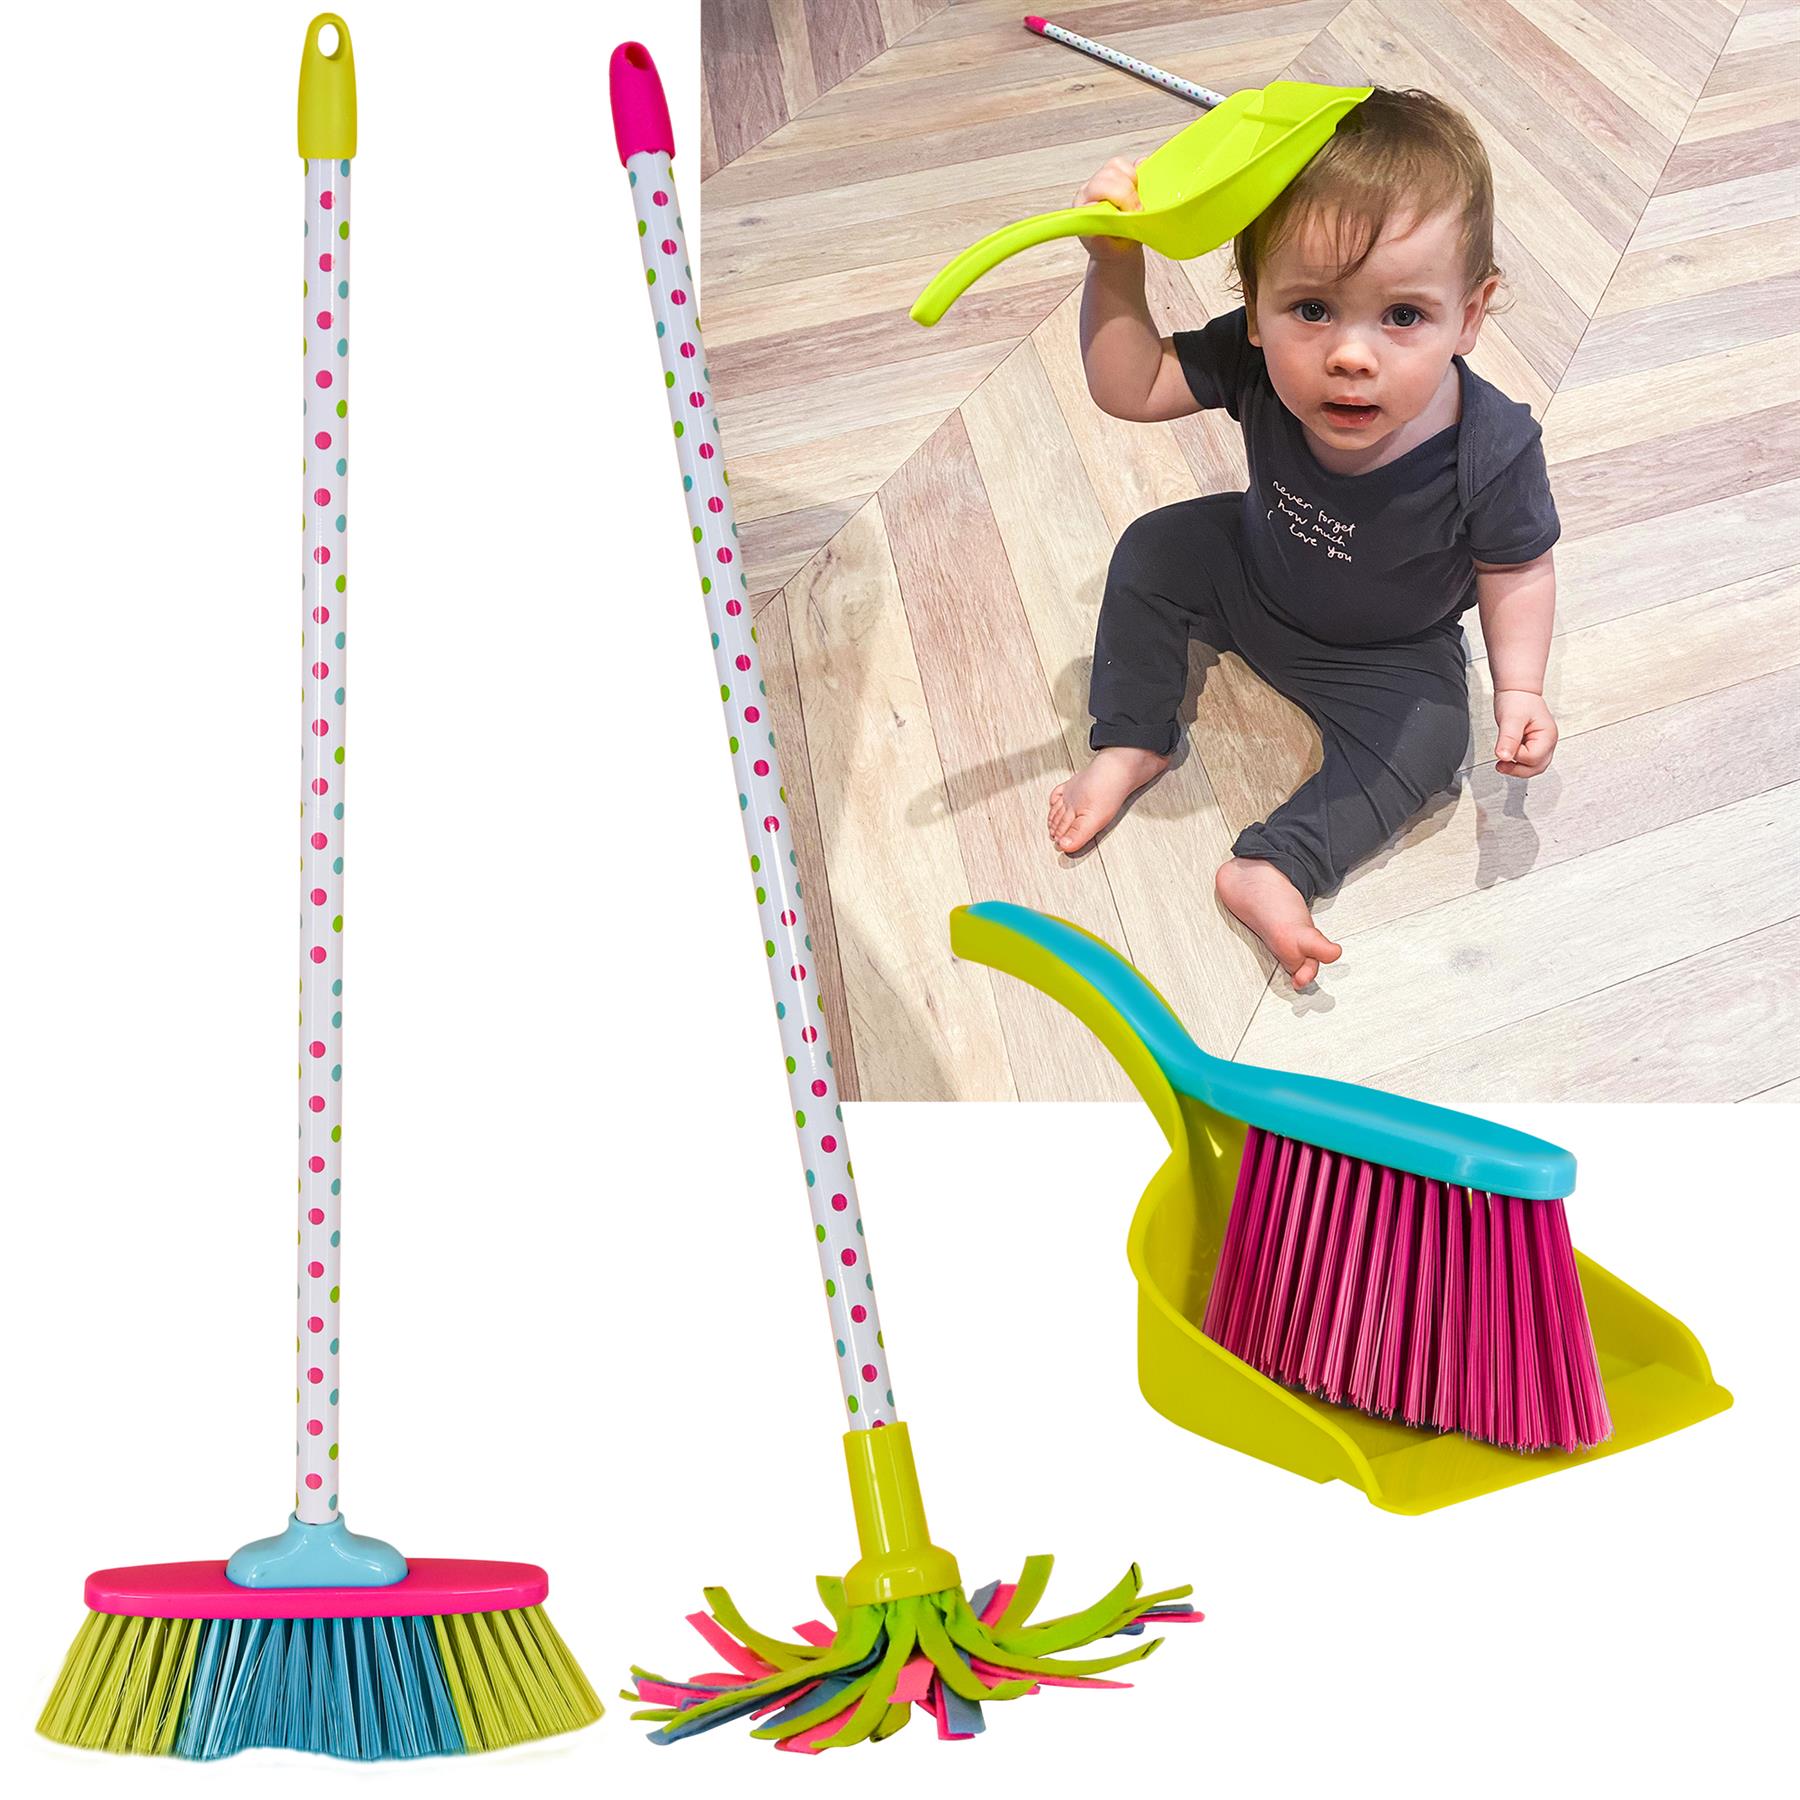 Kids Cleaning Play Set Toy The Magic Toy Shop - The Magic Toy Shop